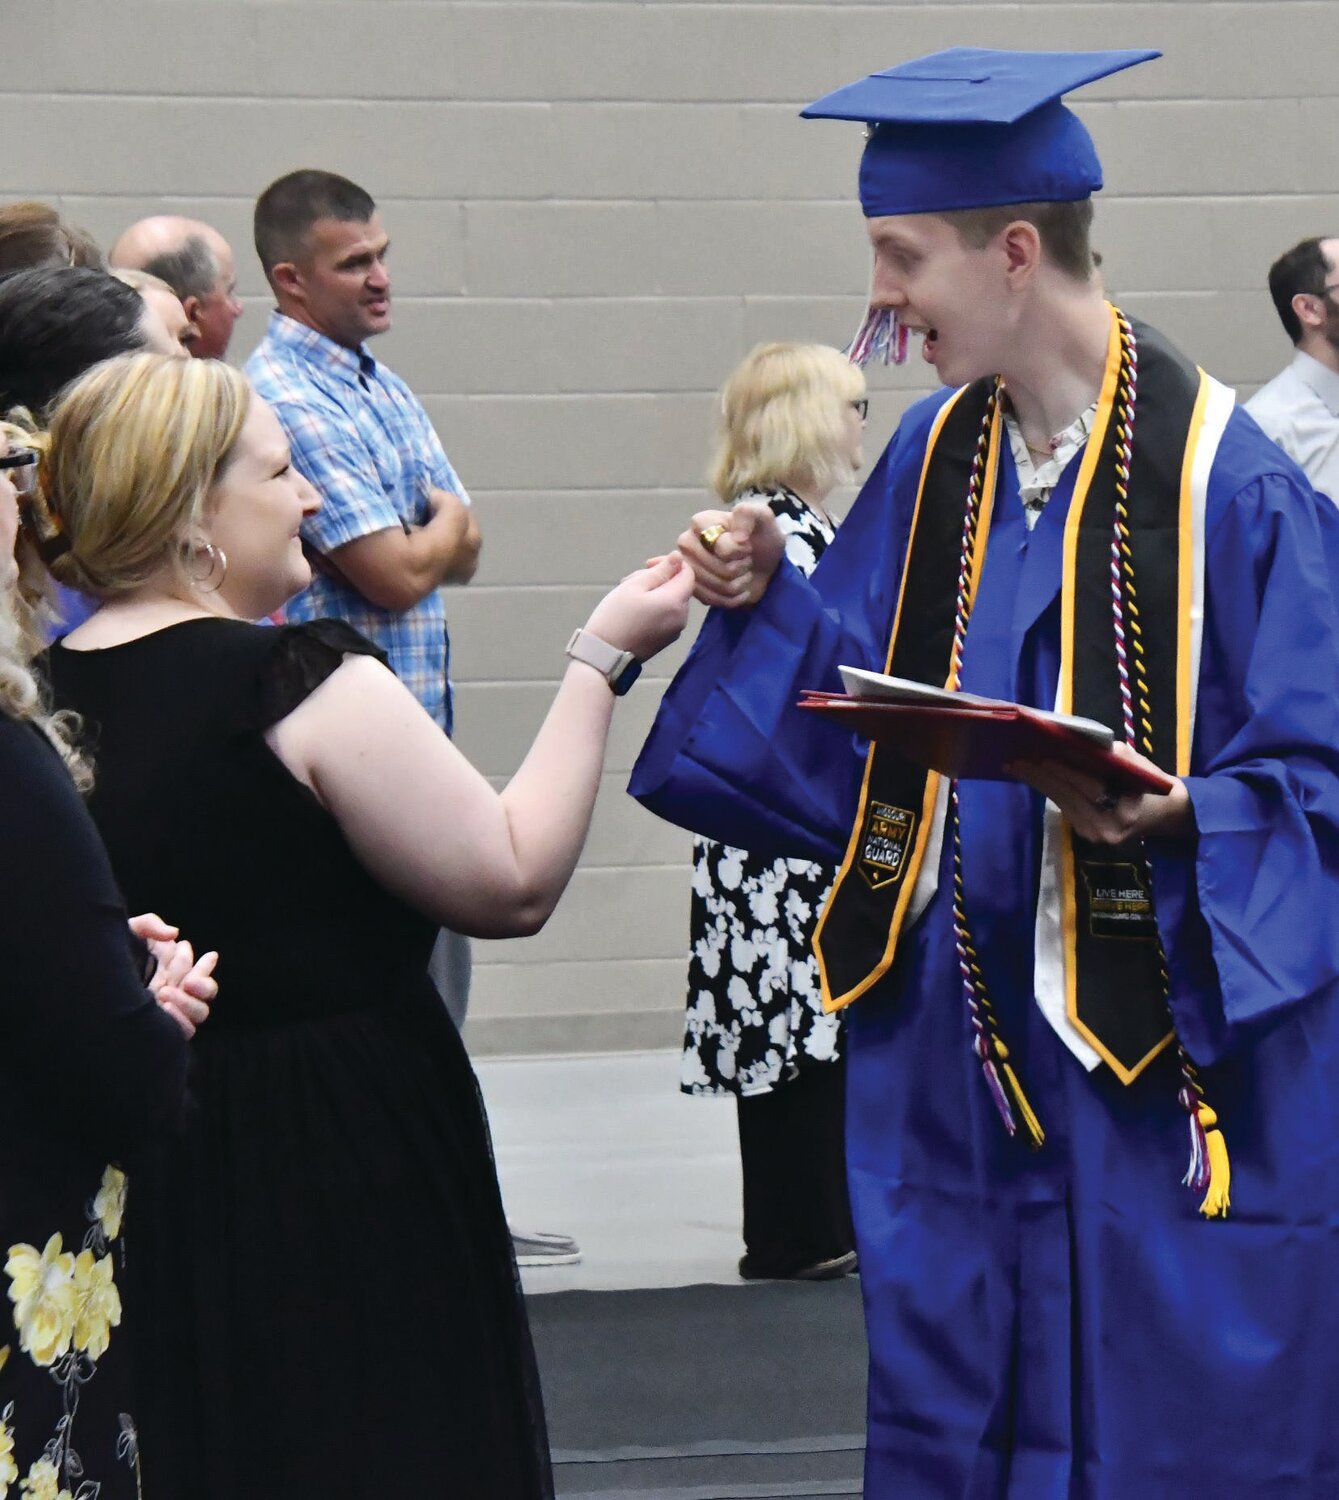 Moberly High School graduate Cory Cable receives a first bump from teacher Brandie Colbert during the tunnel walk at the end of the 55th Annual Commencement ceremony. The tunnel walk is a recently added attraction at the ceremony.